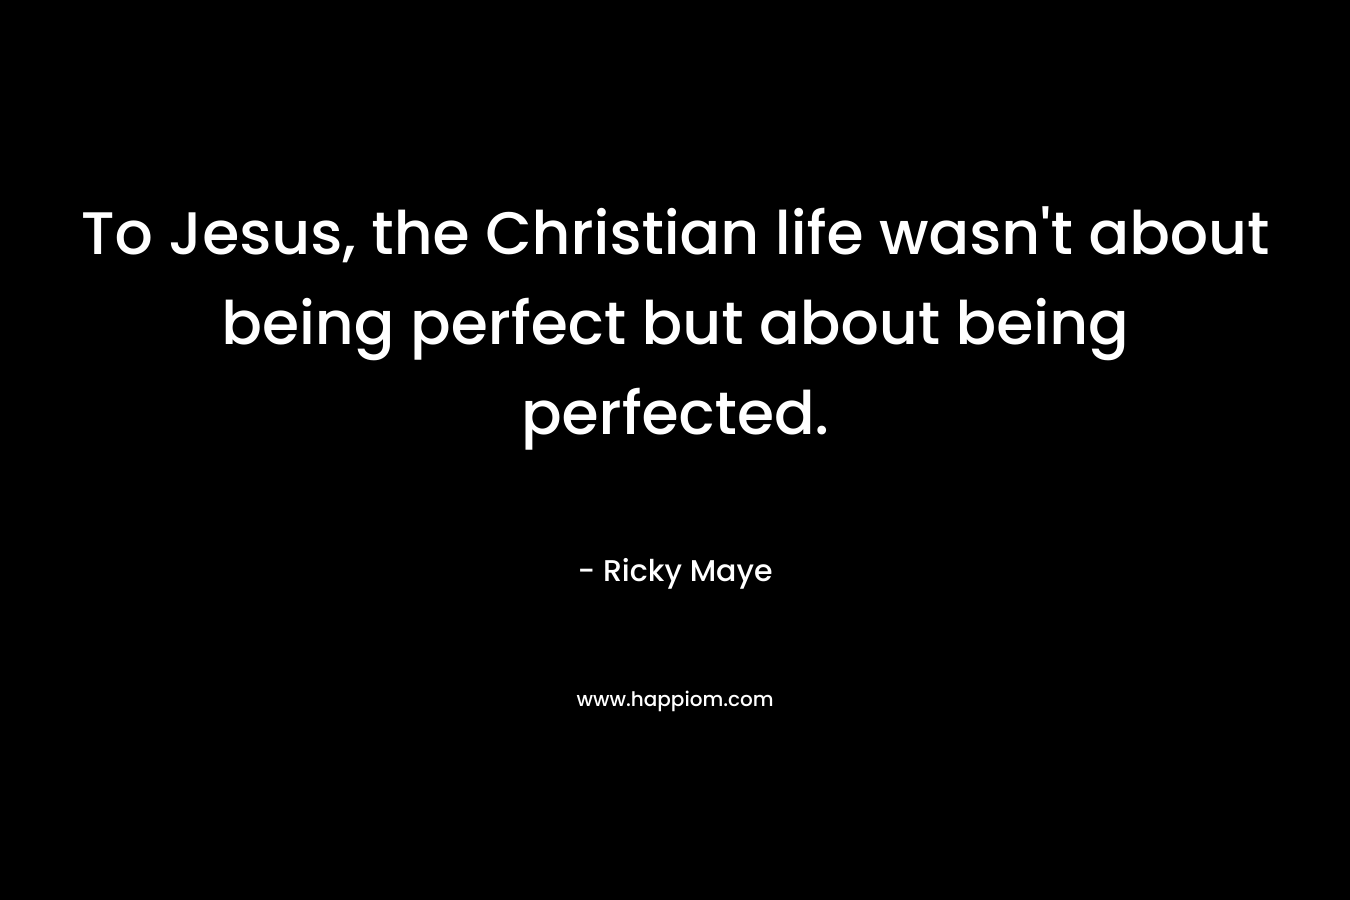 To Jesus, the Christian life wasn't about being perfect but about being perfected.